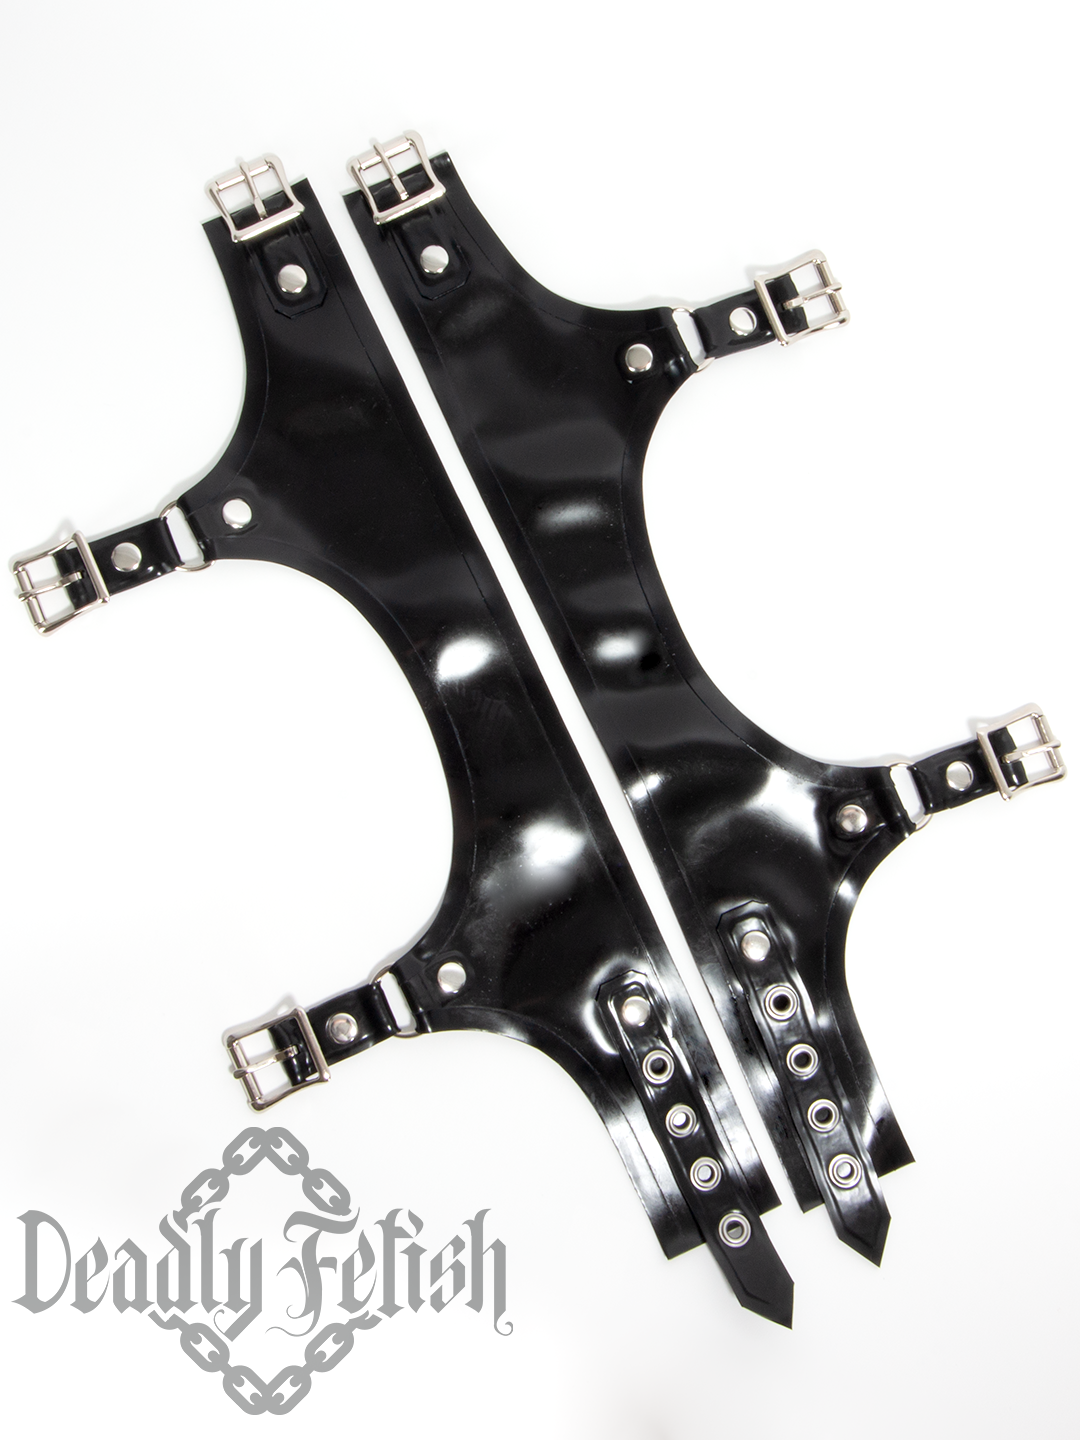 Deadly Fetish Made-To-Order Latex: Harness Addition #14 Single Buckle Leg Braces